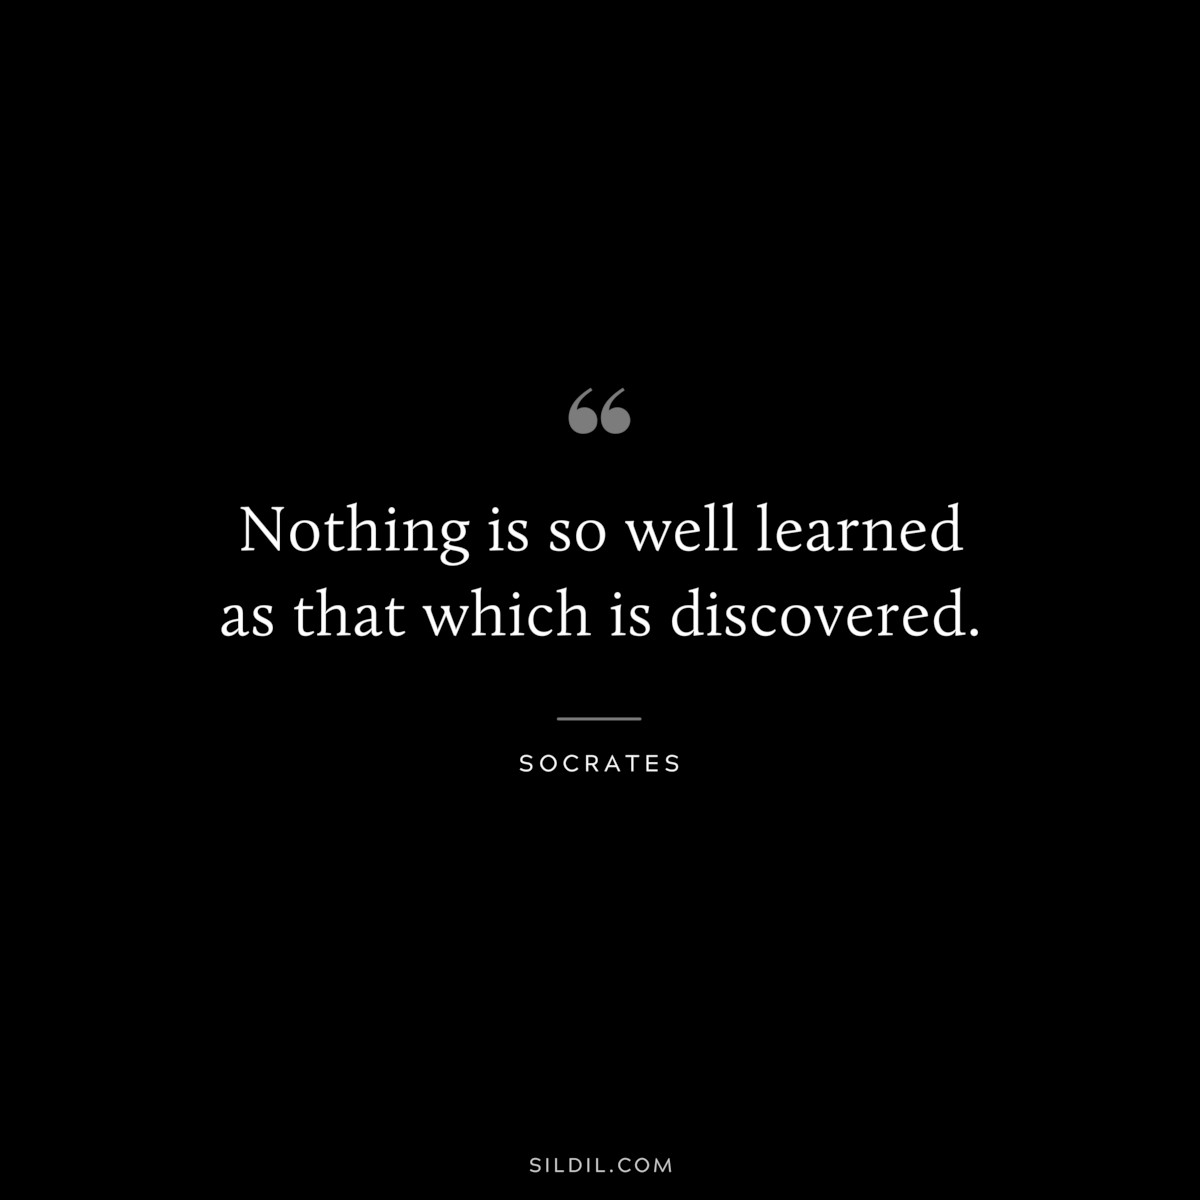 Nothing is so well learned as that which is discovered. ― Socrates